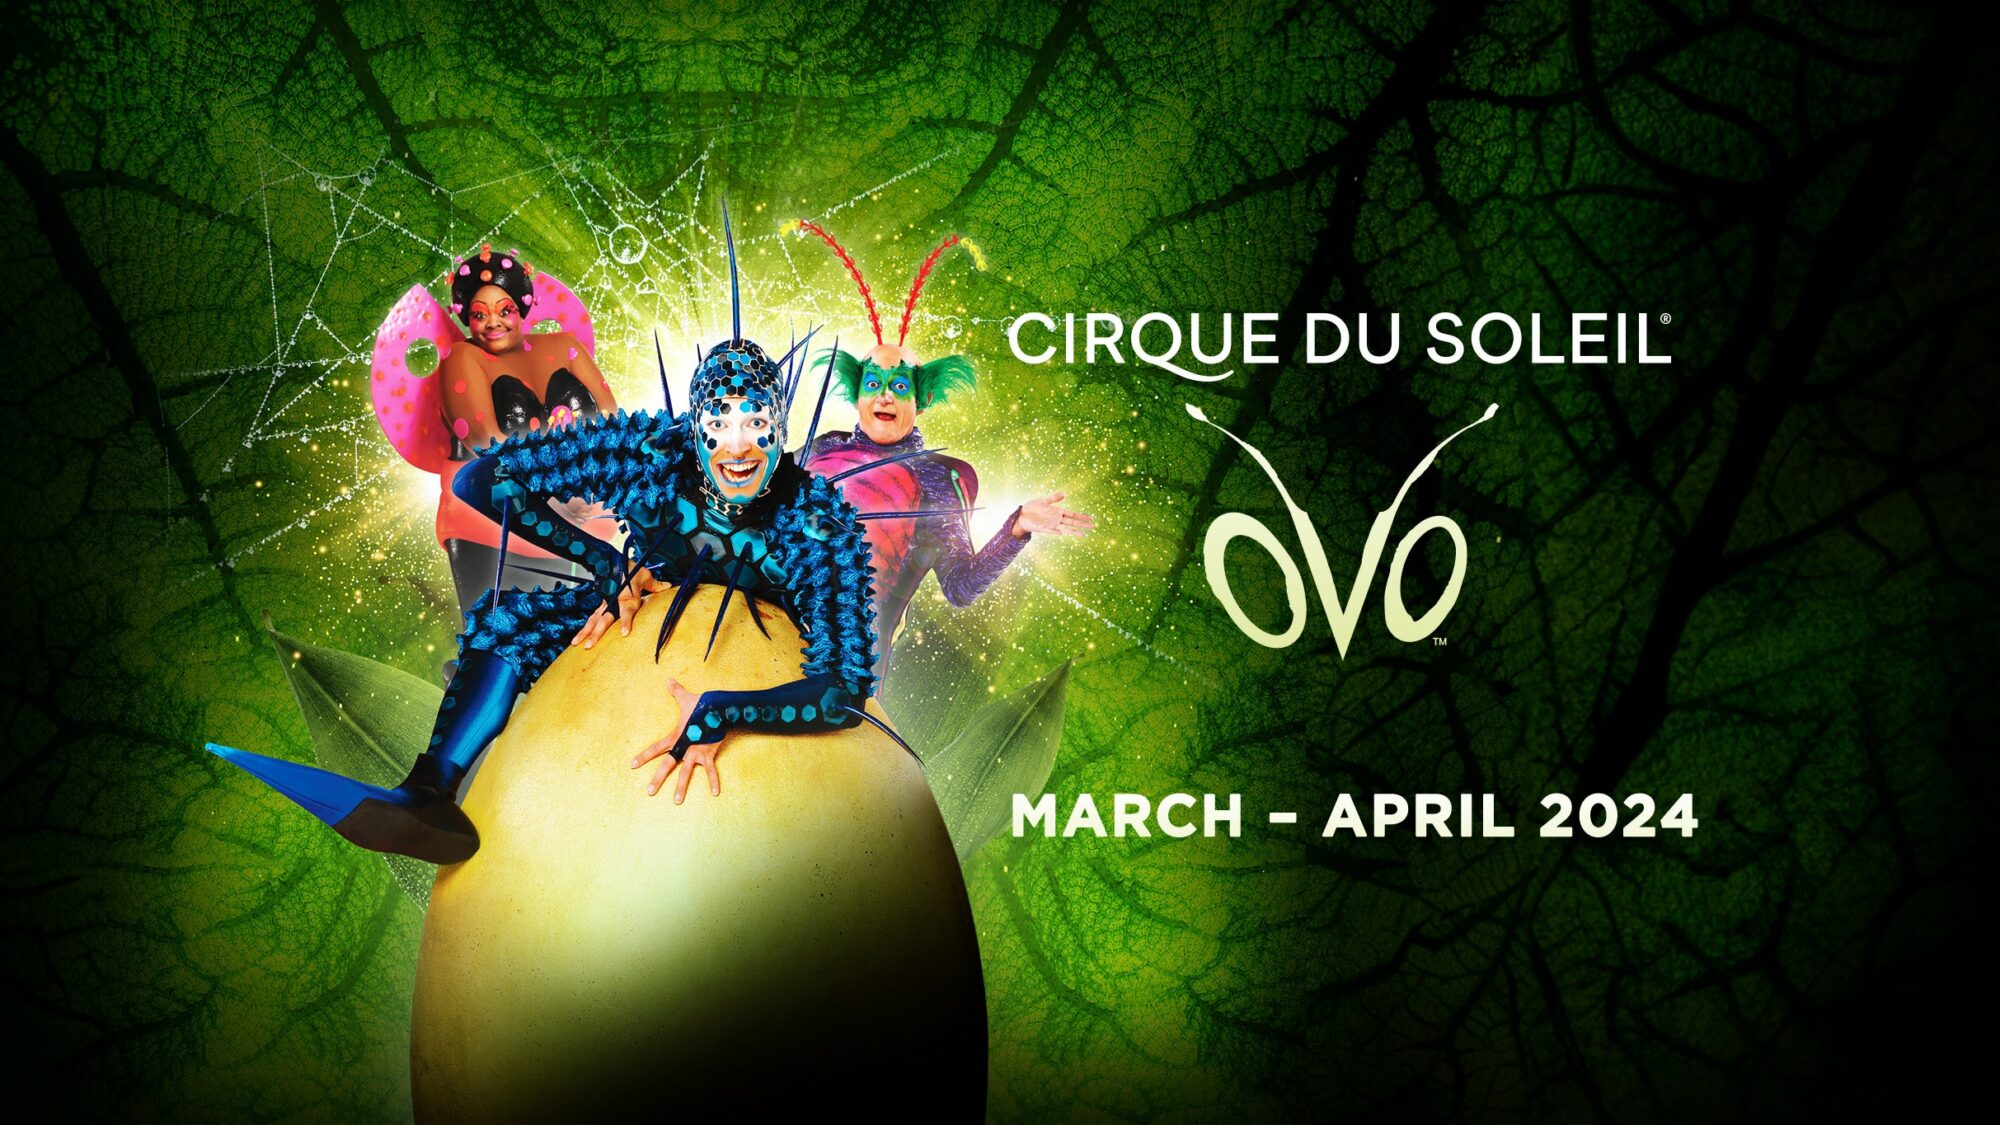 Image name Cirque Du Soleil Ovo at First Direct Arena Leeds the 11 image from the post Cirque Du Soleil : Ovo at First Direct Arena, Leeds in Yorkshire.com.